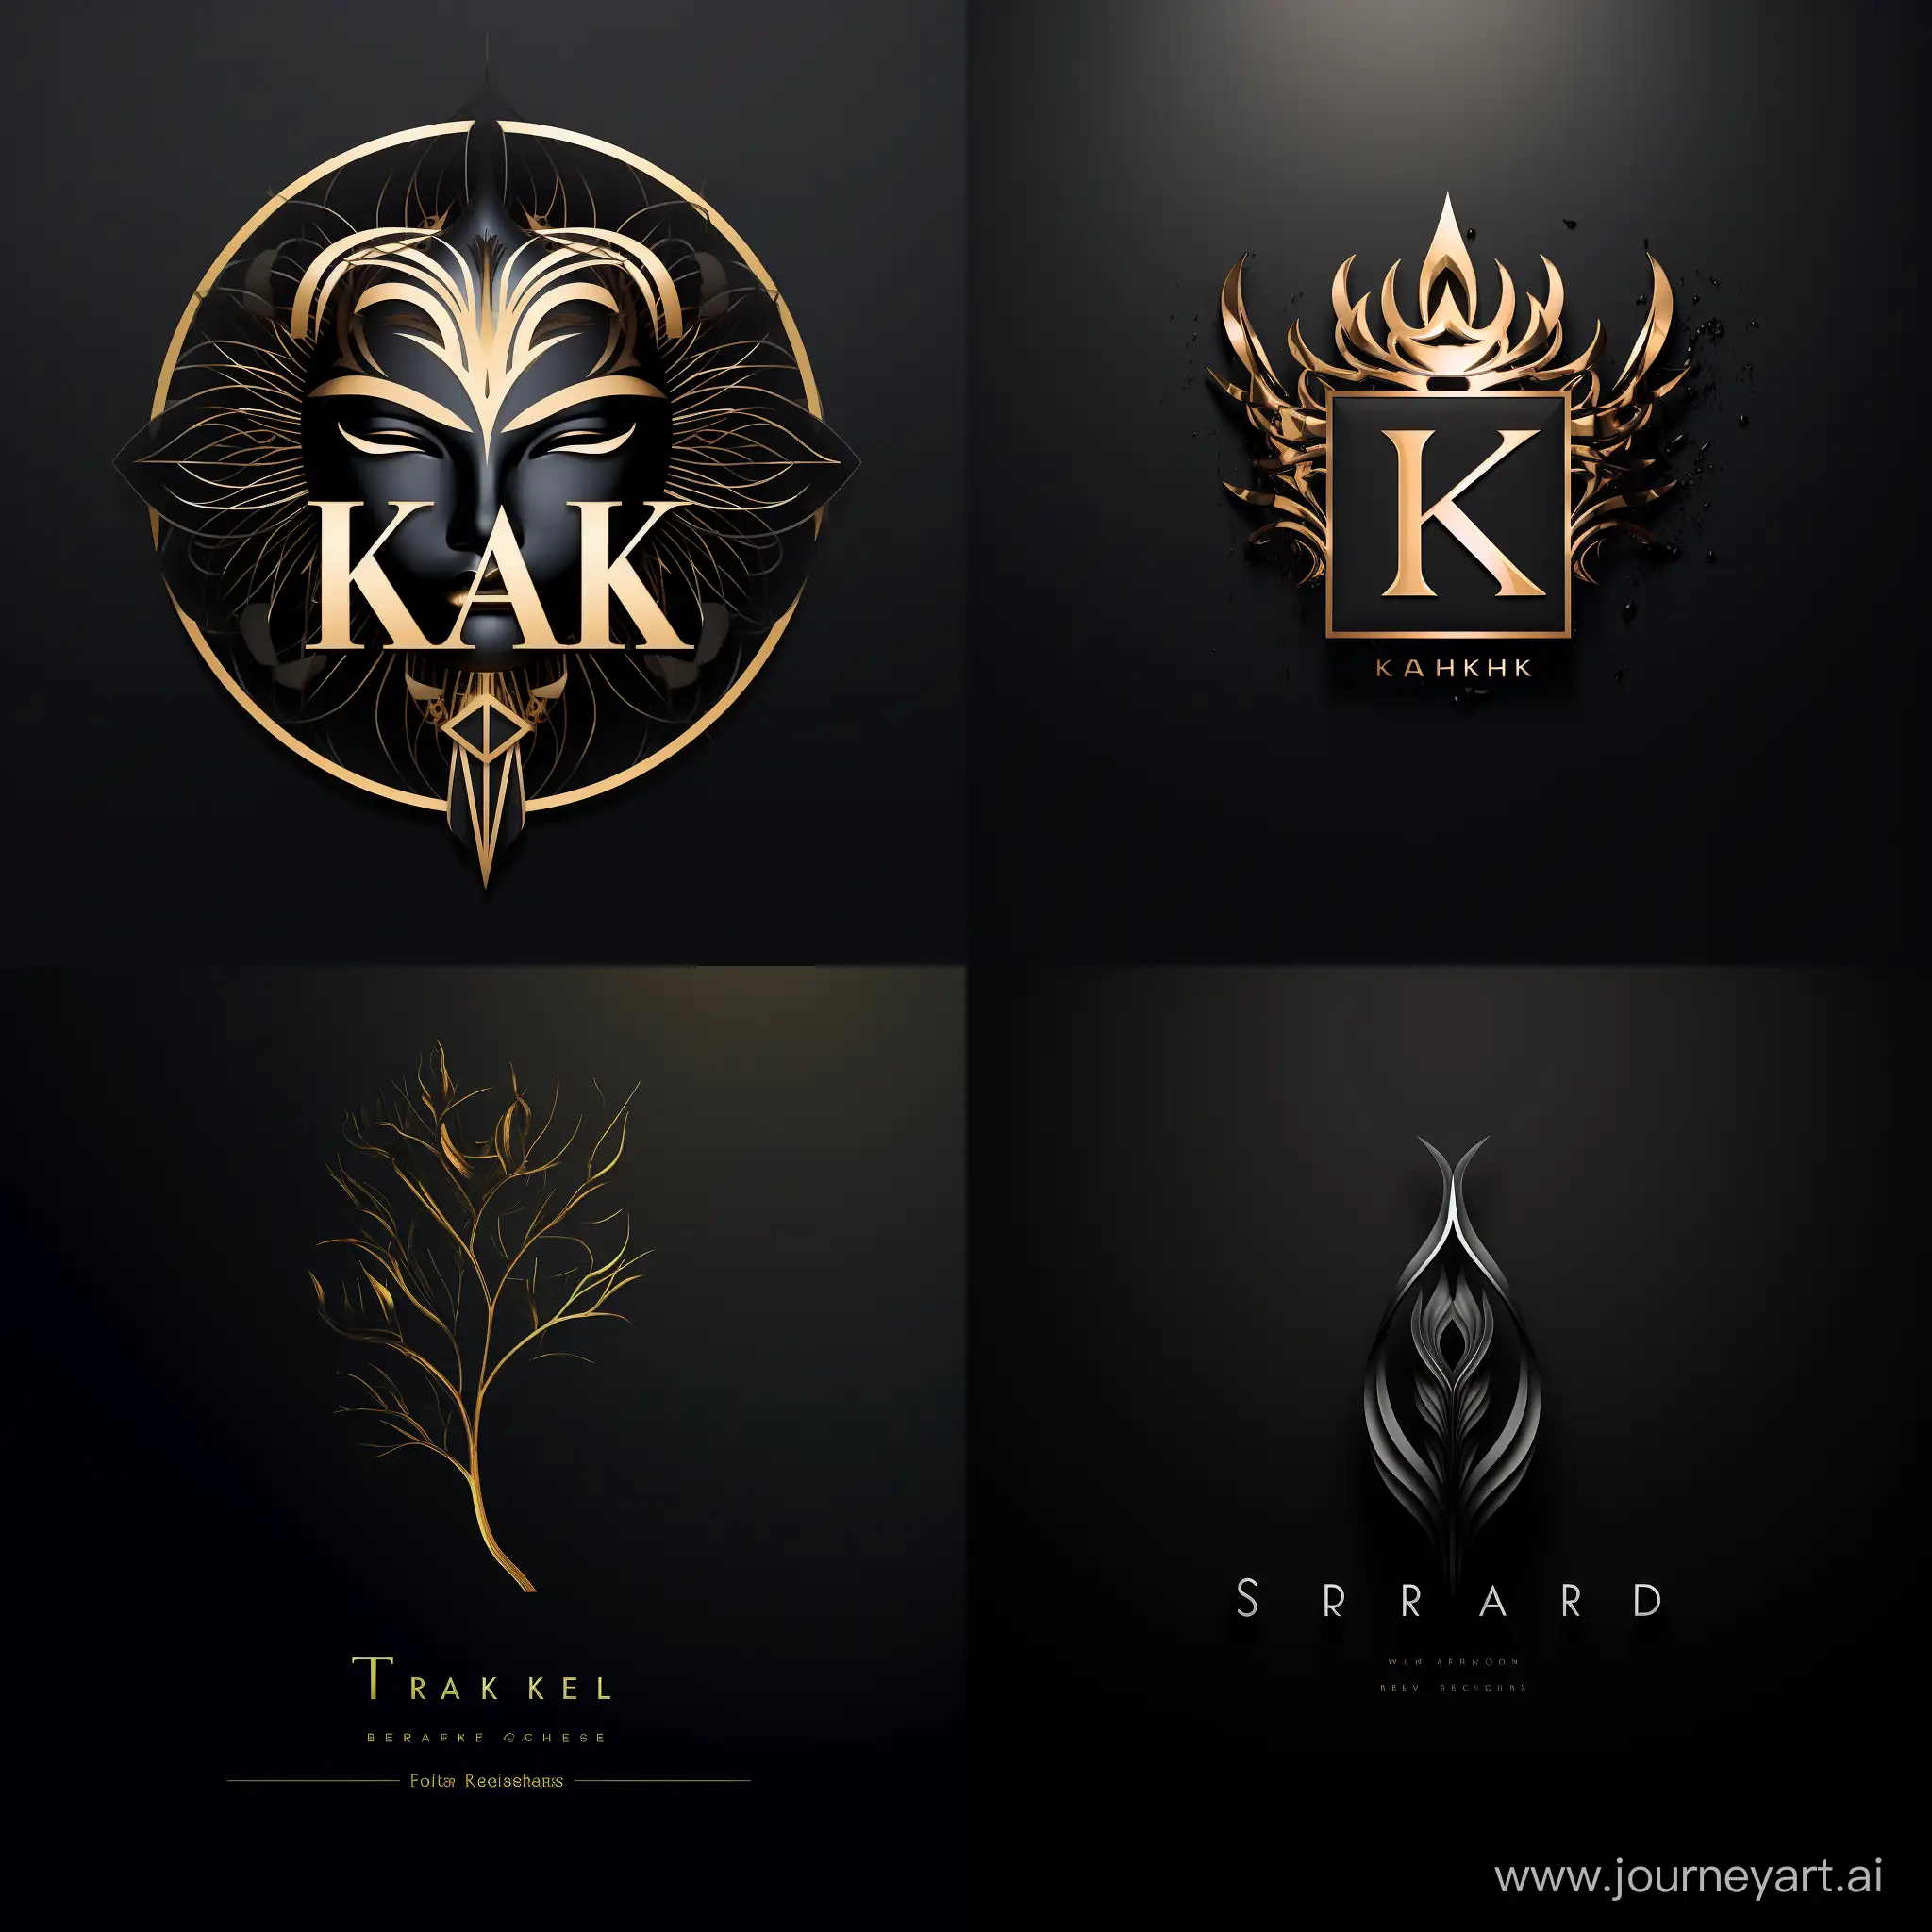 Sleek-Black-Logo-Design-with-A-Creative-Branding-in-a-Square-Format